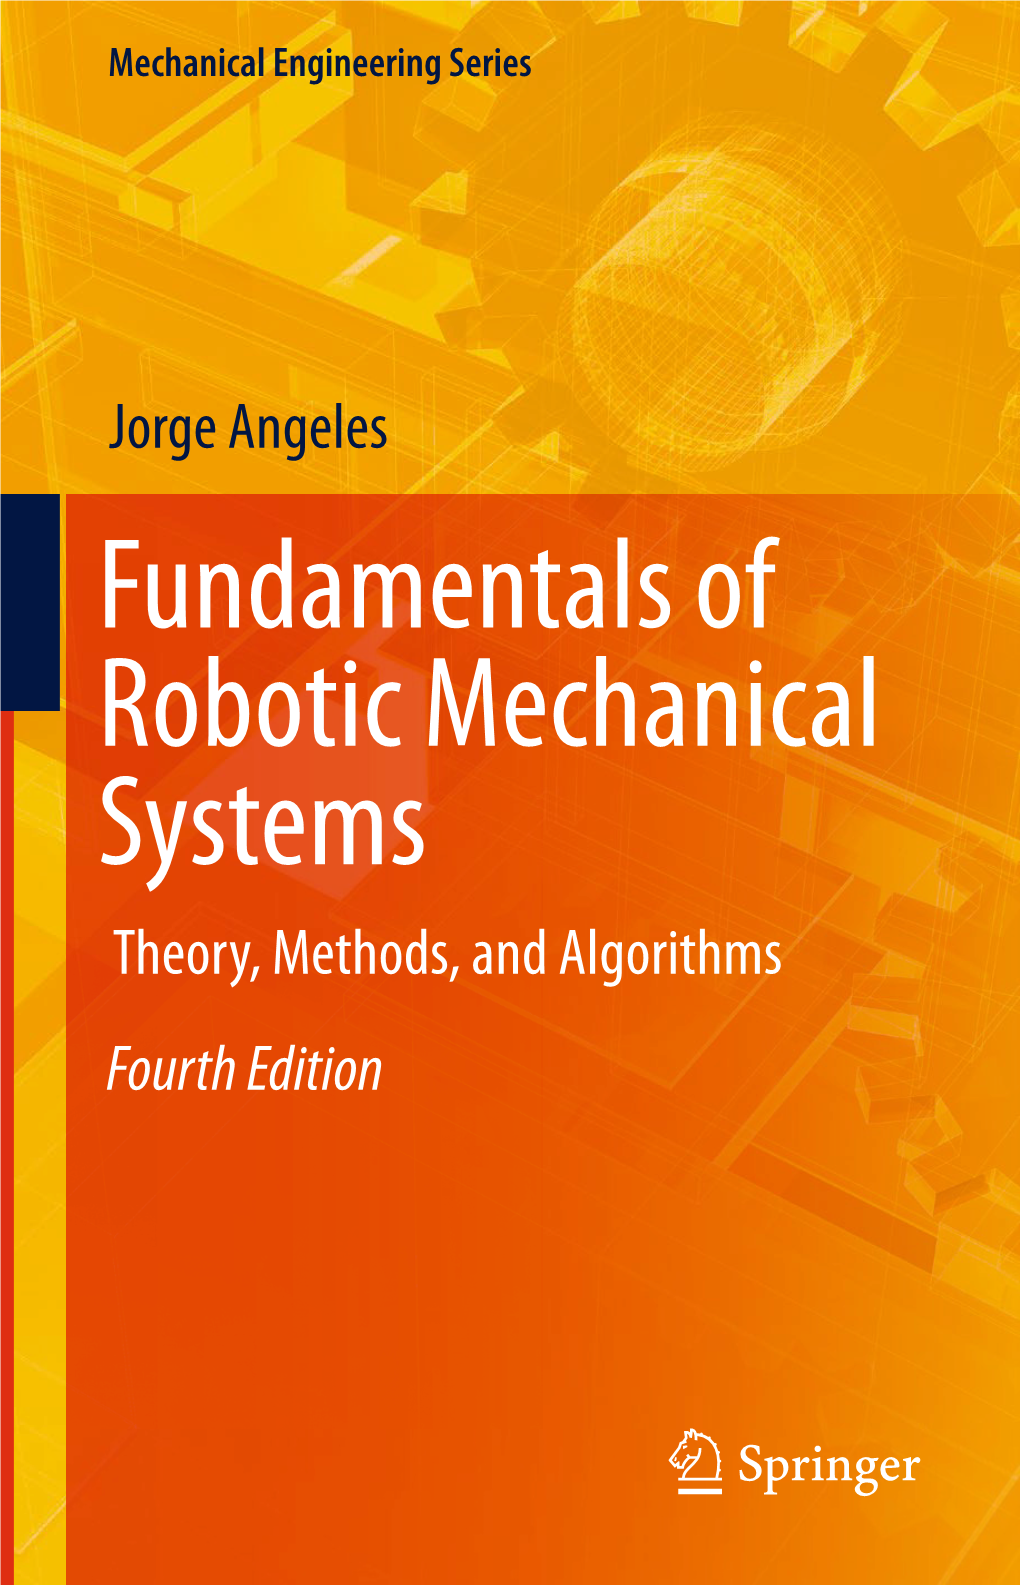 Fundamentals of Robotic Mechanical Systems Theory, Methods, and Algorithms Fourth Edition Fundamentals of Robotic Mechanical Systems Mechanical Engineering Series